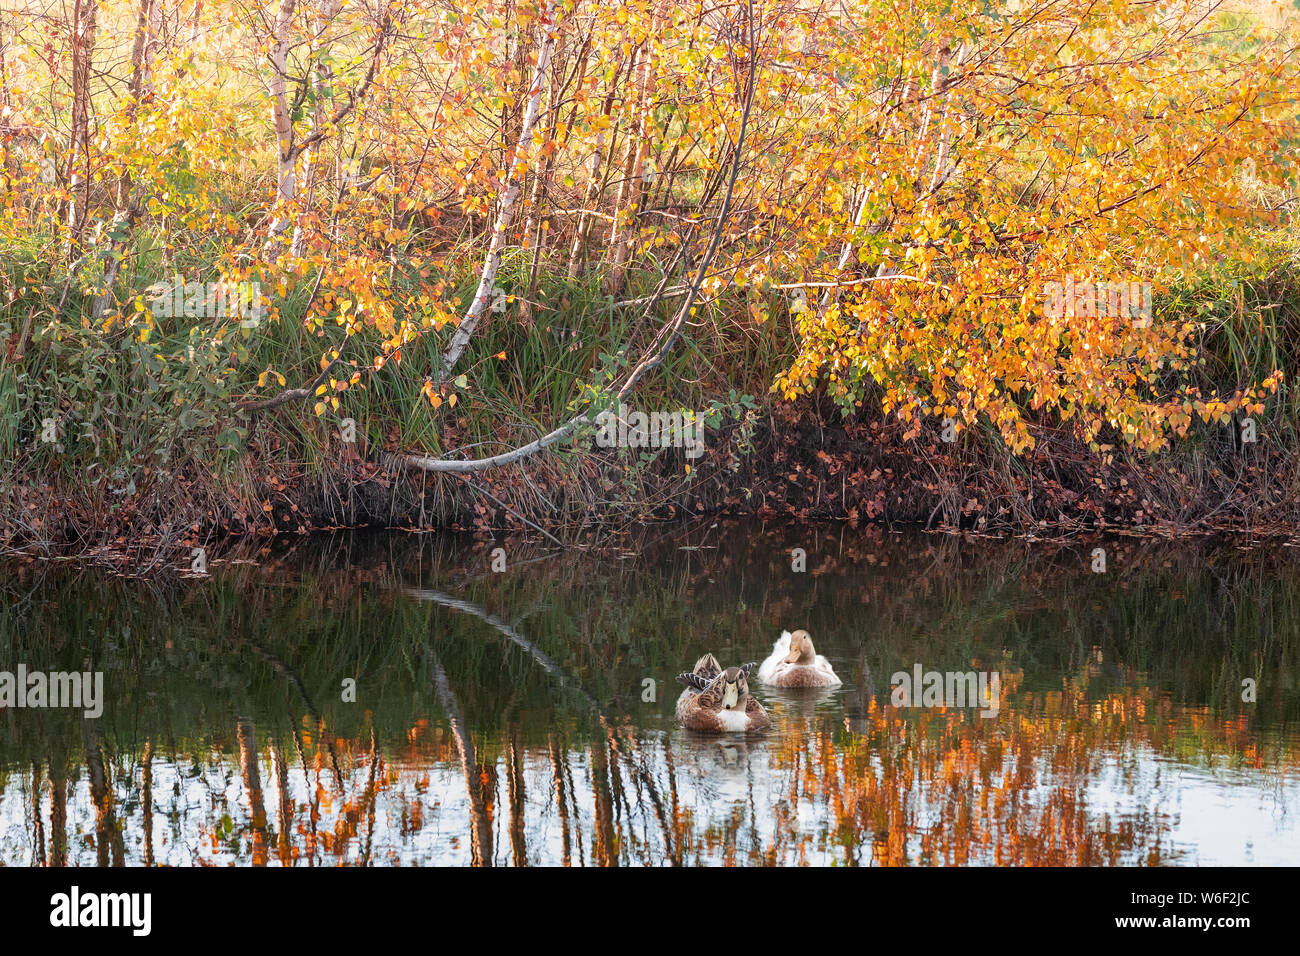 Two ducks in the lake, and golden birches in the autumn background Stock Photo